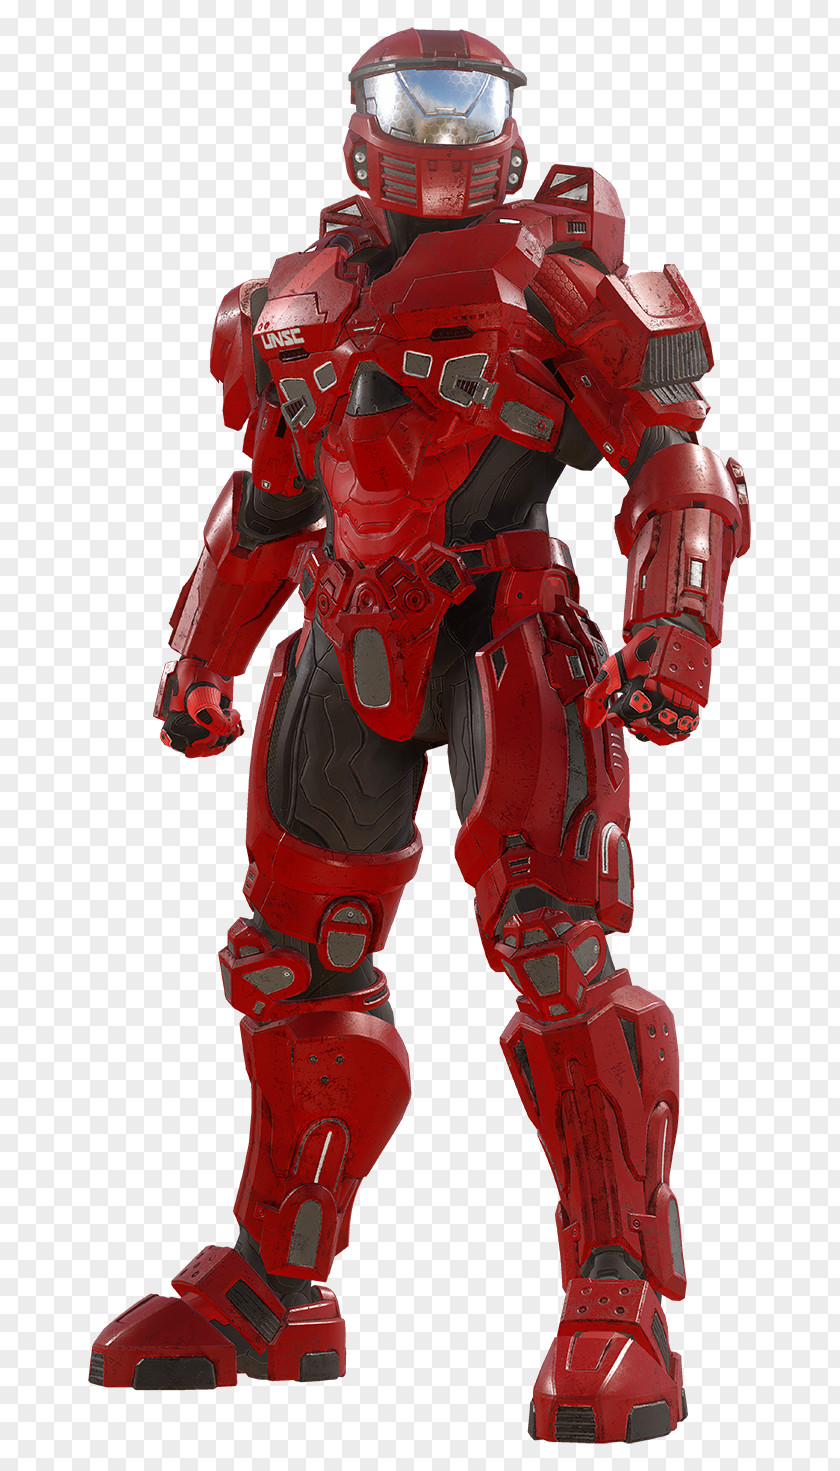 Halo 5: Guardians 4 Wars 2 Master Chief PNG